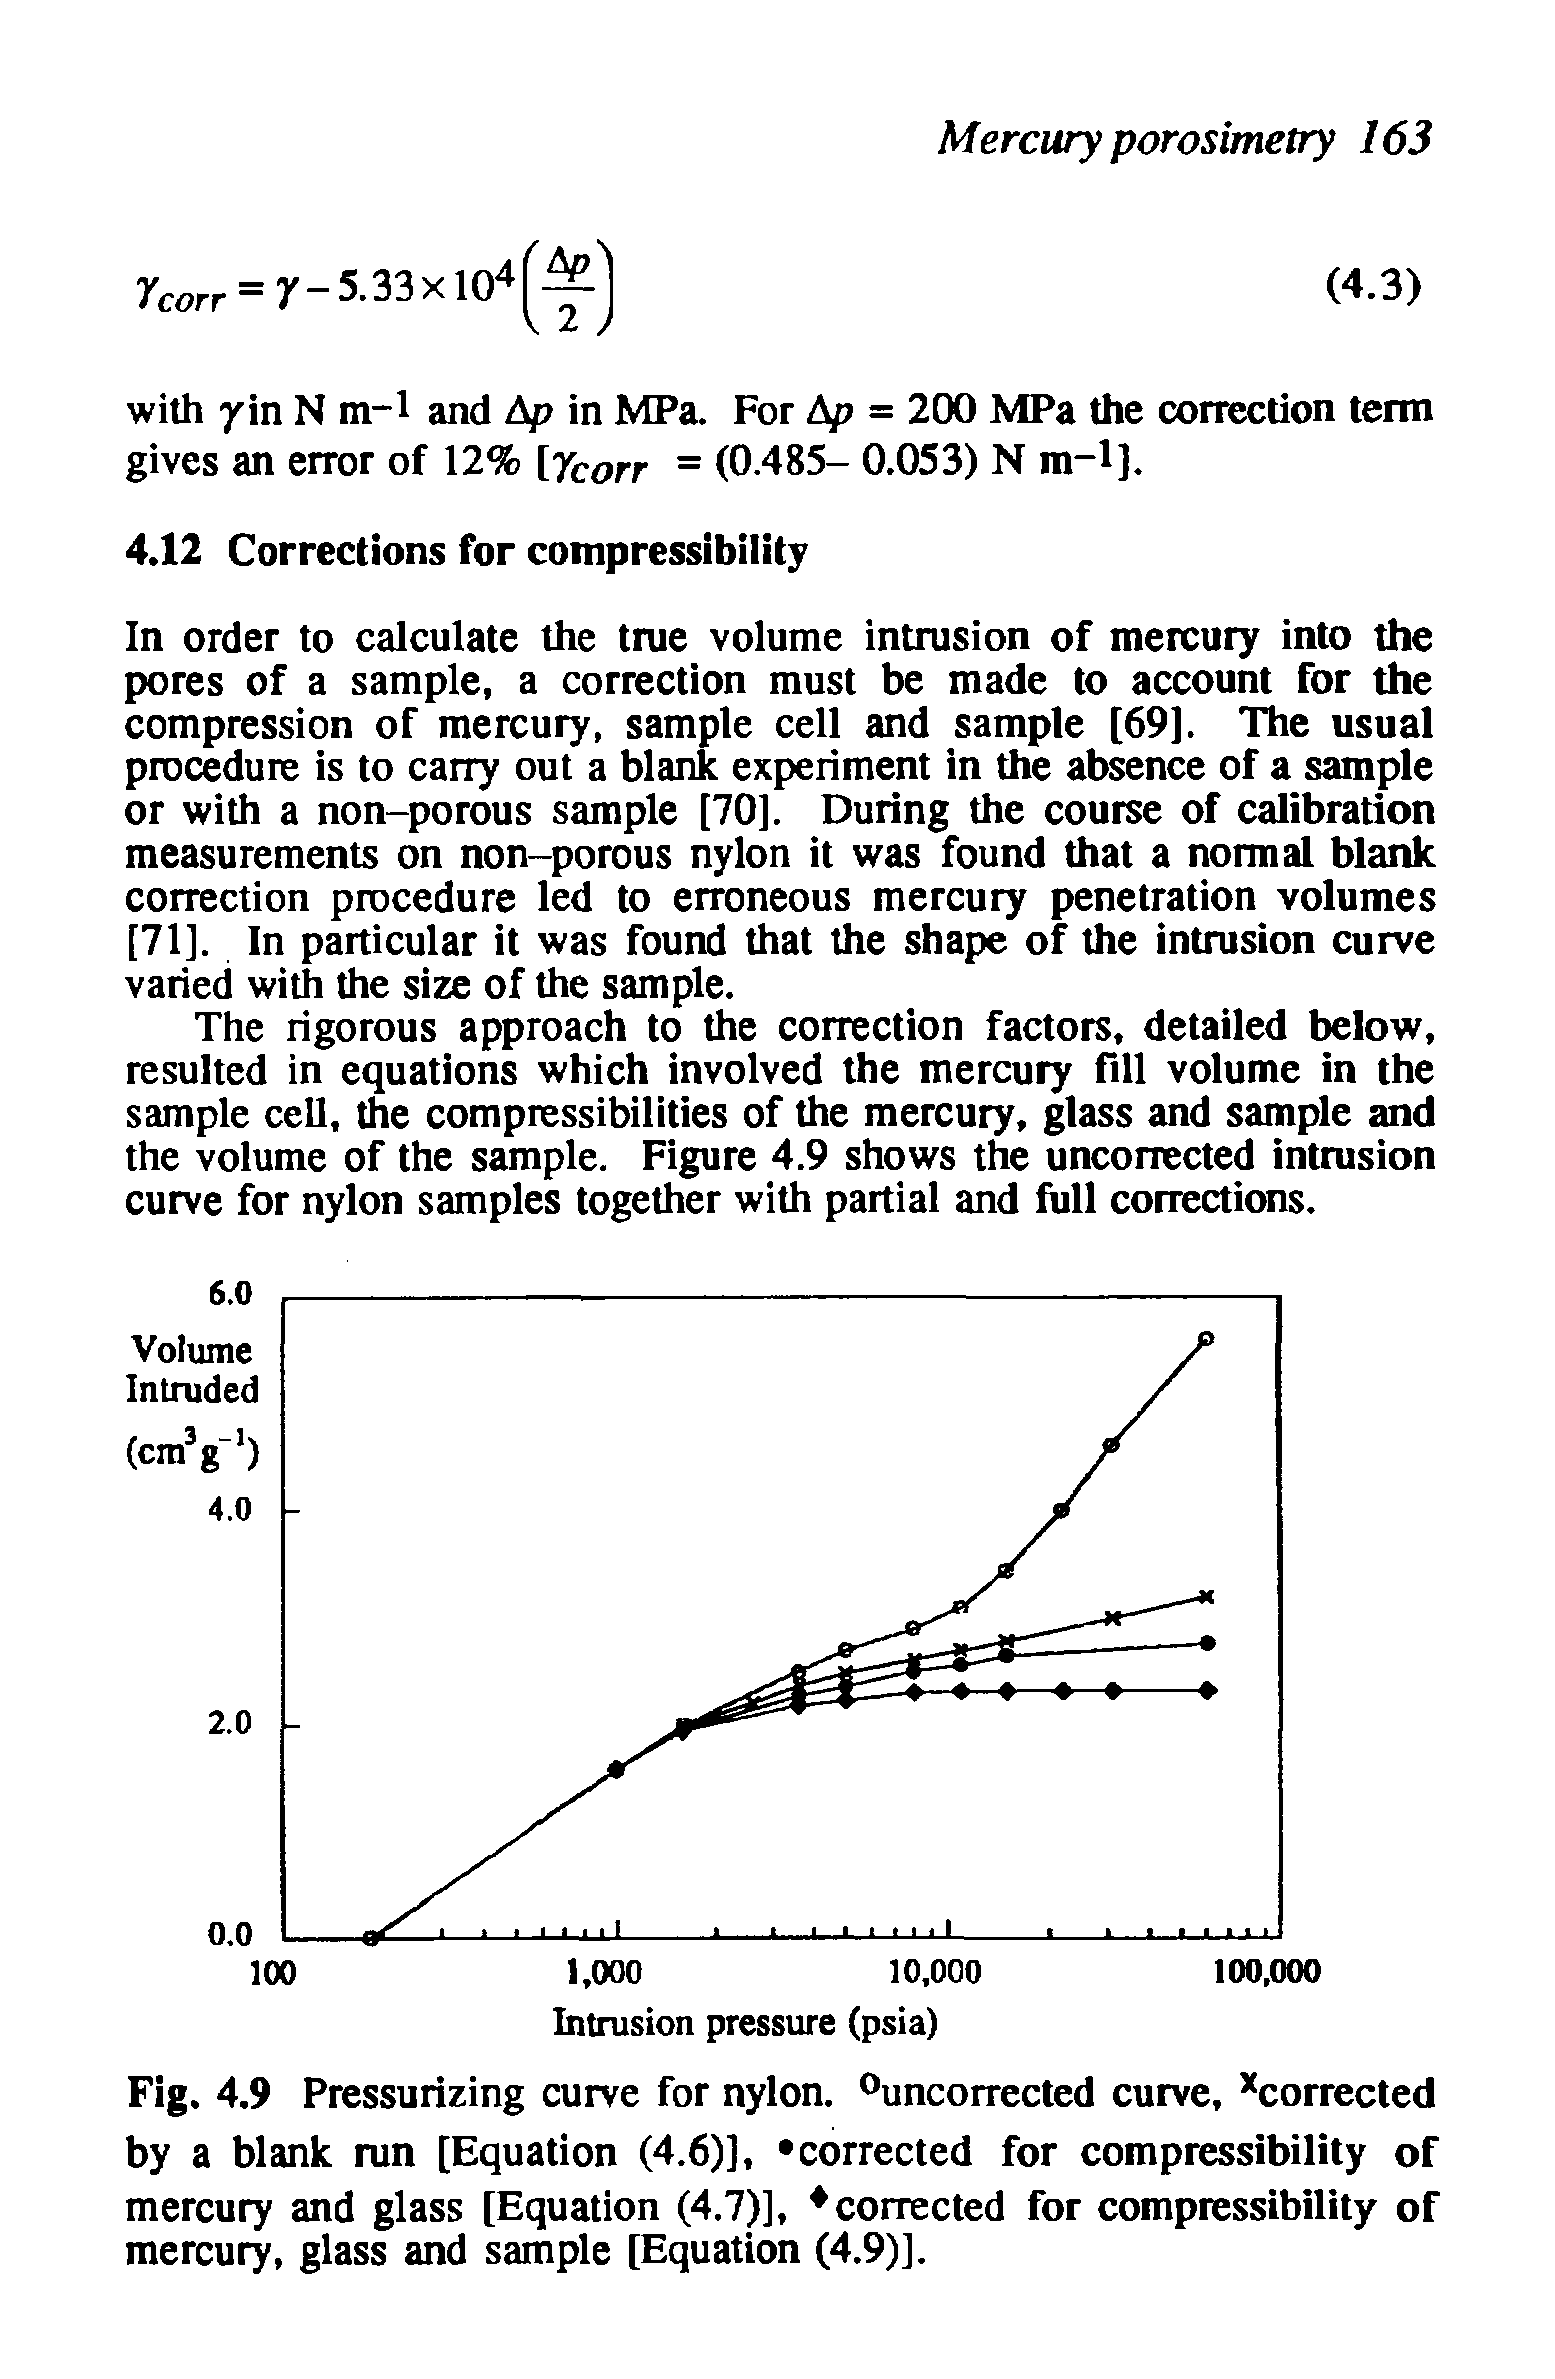 Fig. 4.9 Pressurizing curve for nylon. Ouncorrected curve, corrected by a blank run [Equation (4.6)], corrected for compressibility of mercury and glass [Equation (4.7)], corrected for compressibility of mercury, glass and sample [Equation (4.9)].